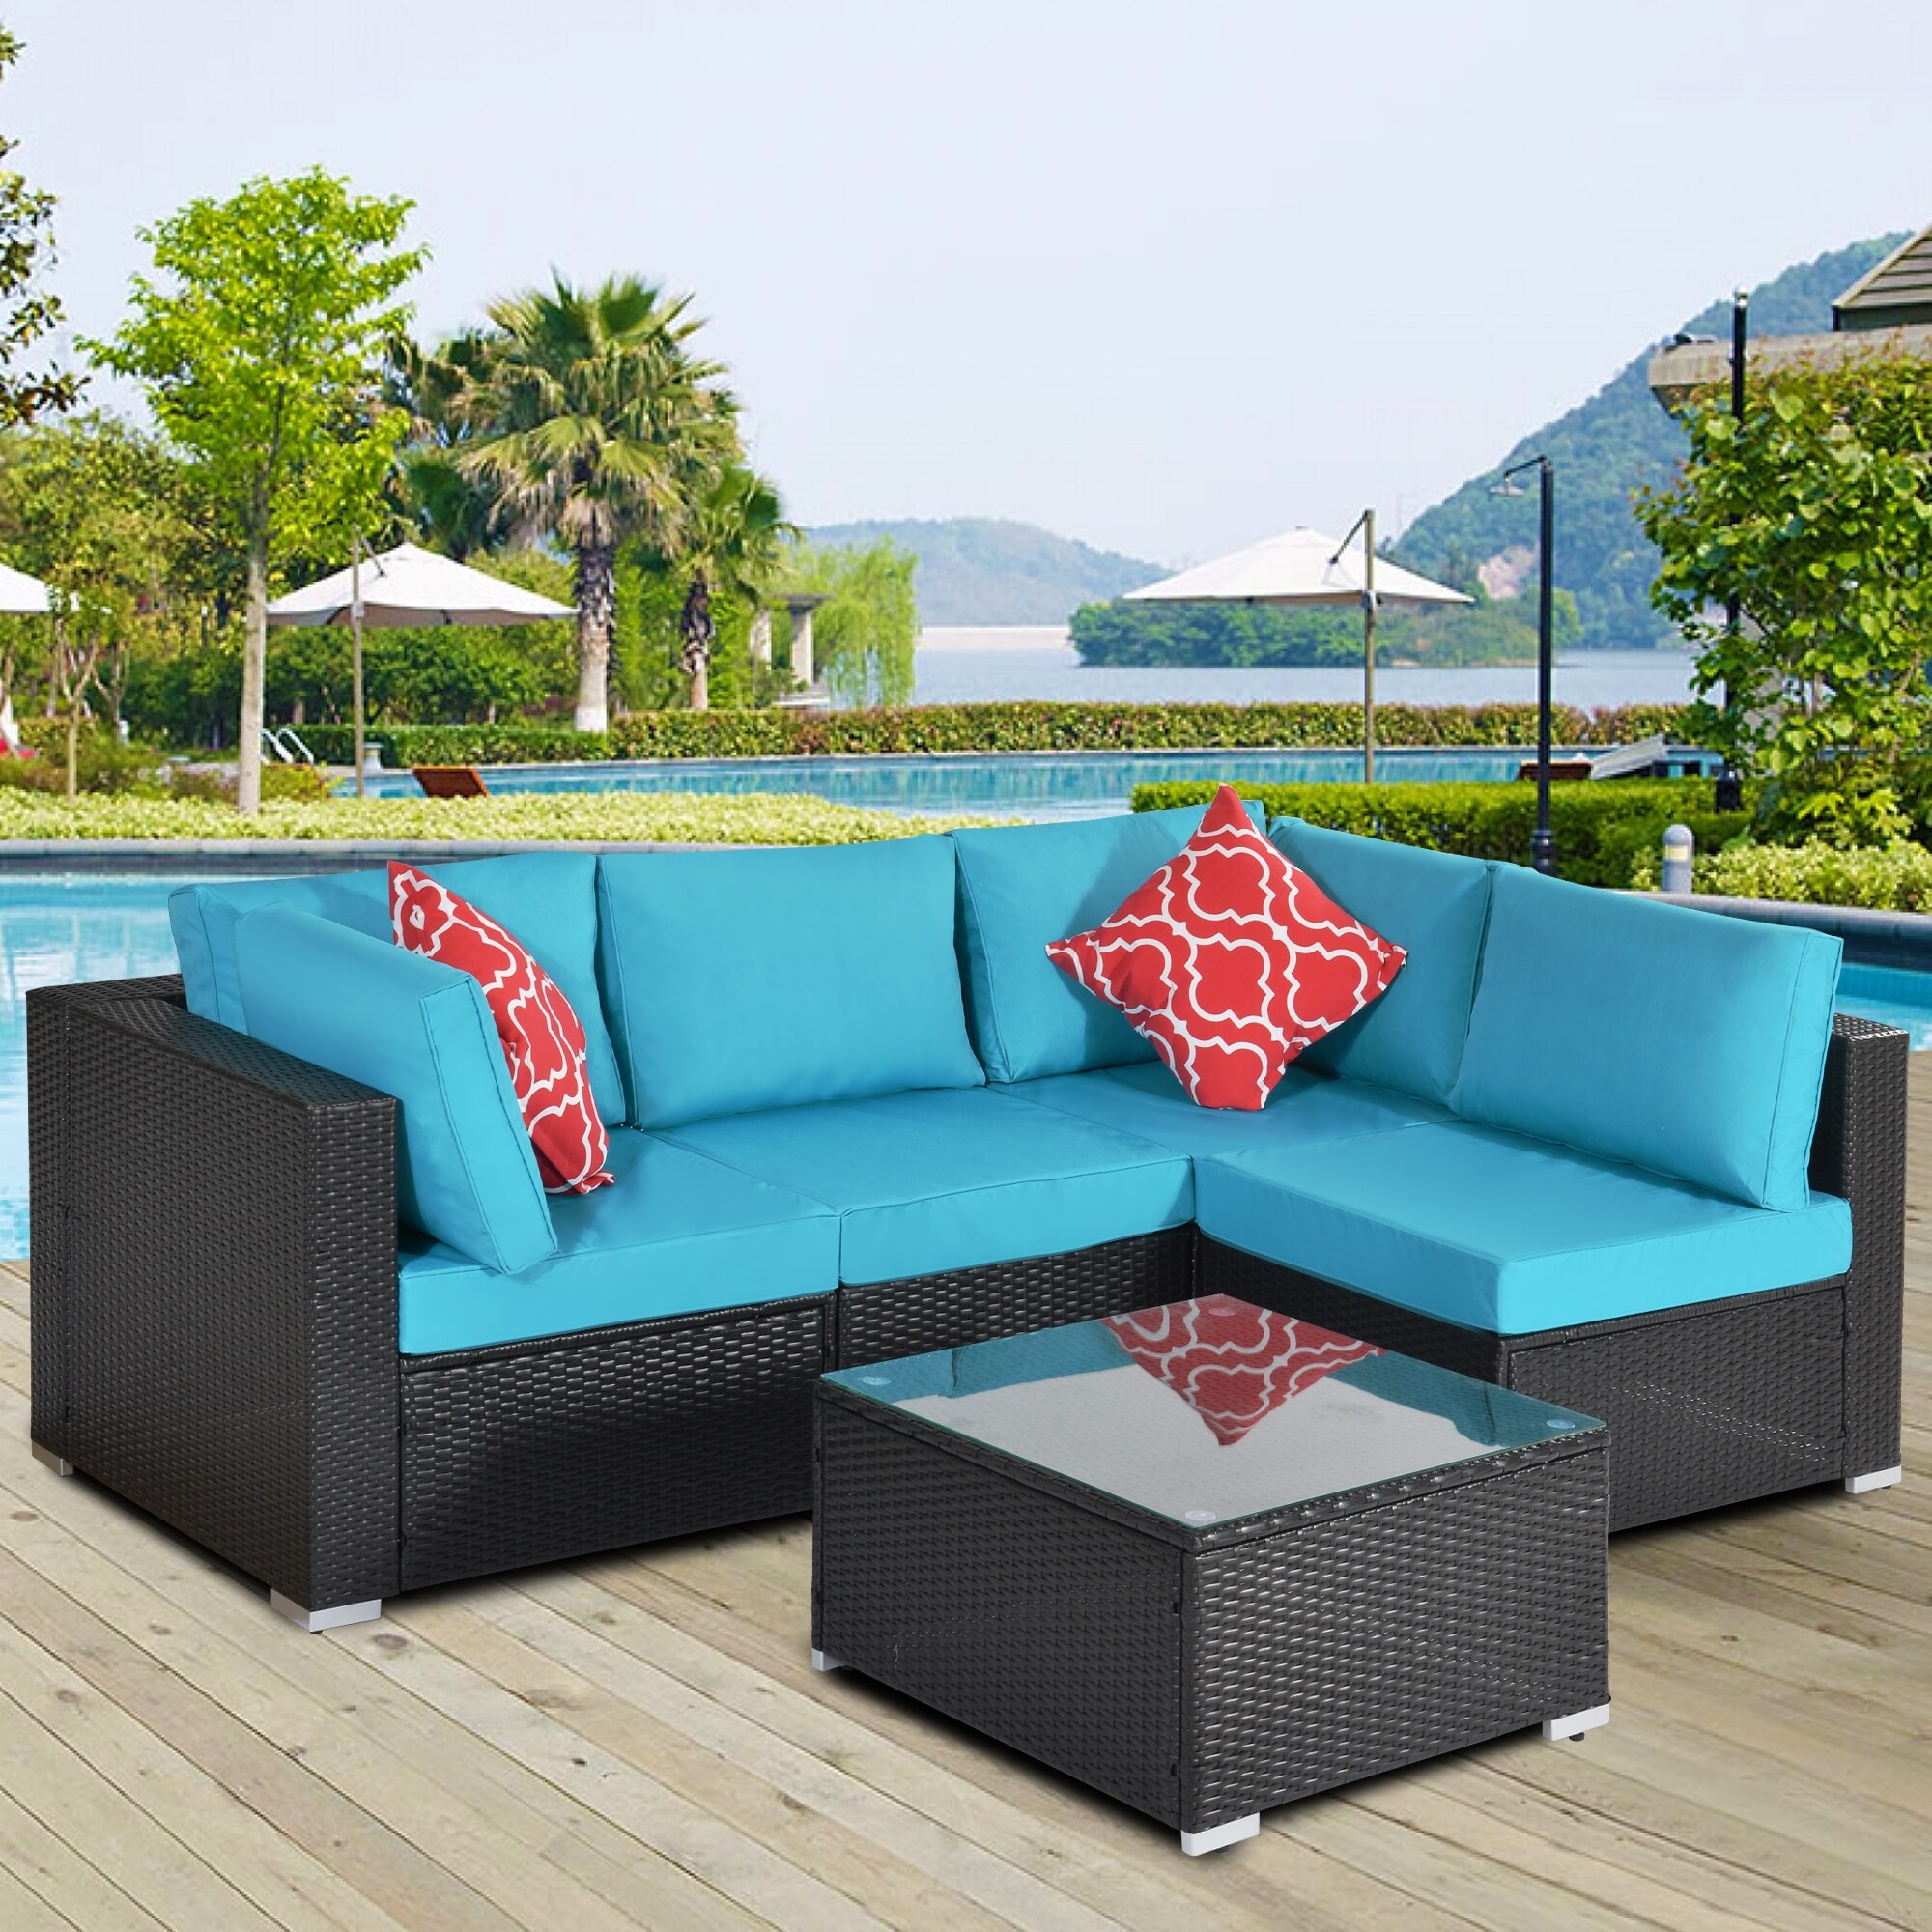 5-piece Rattan Wicker Outdoor Sectional Sofa With 2 Pillows And Coffee Table